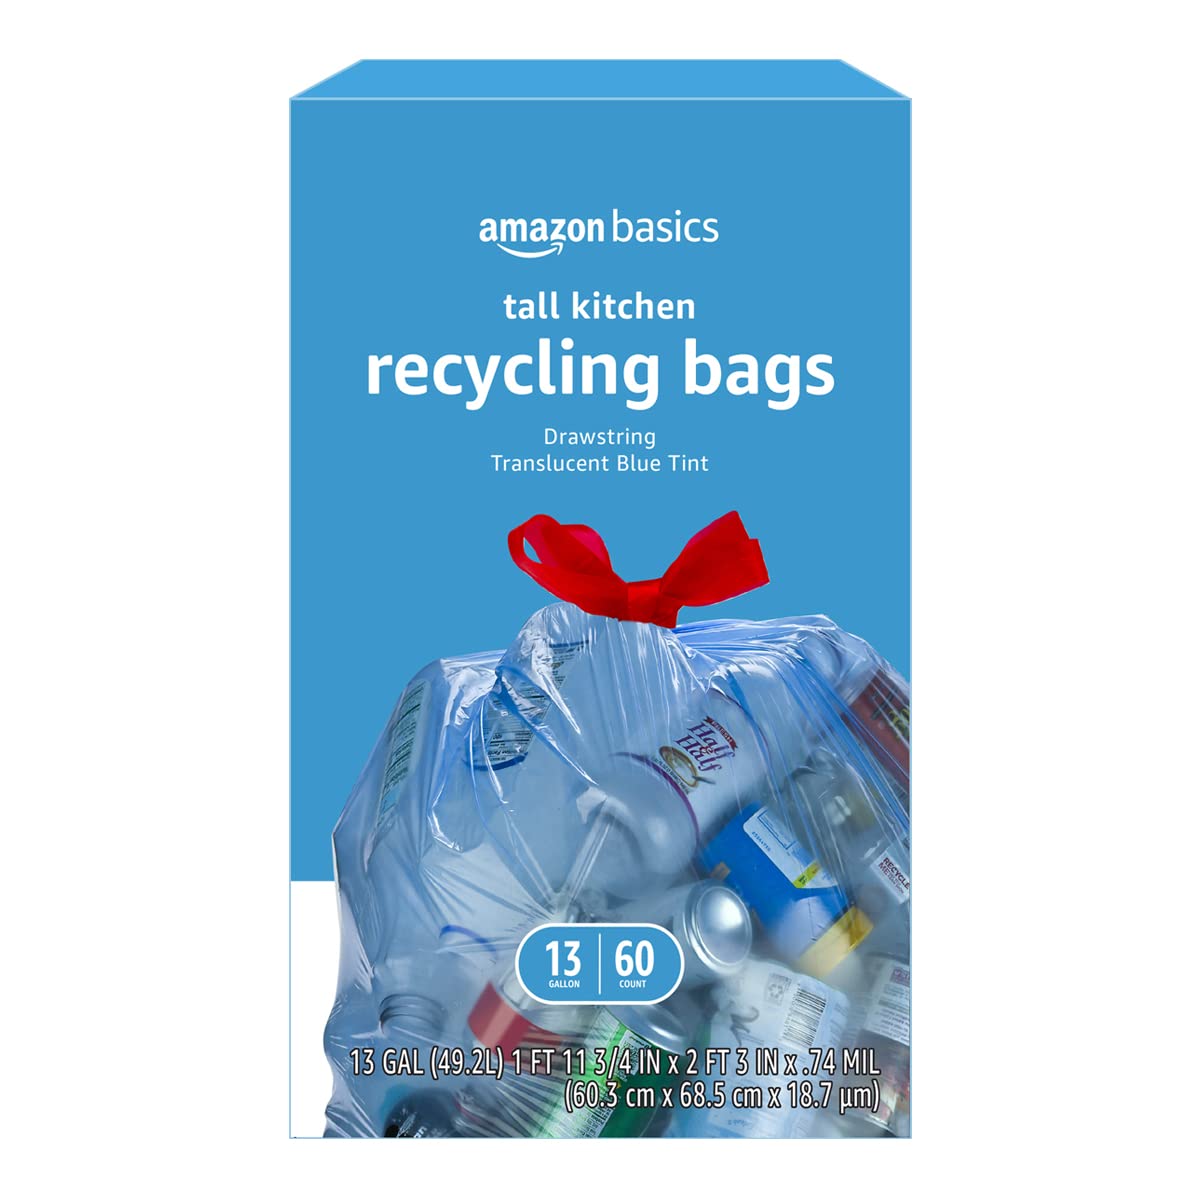 Clear Recycling Bags 13 gallon, 60 count.